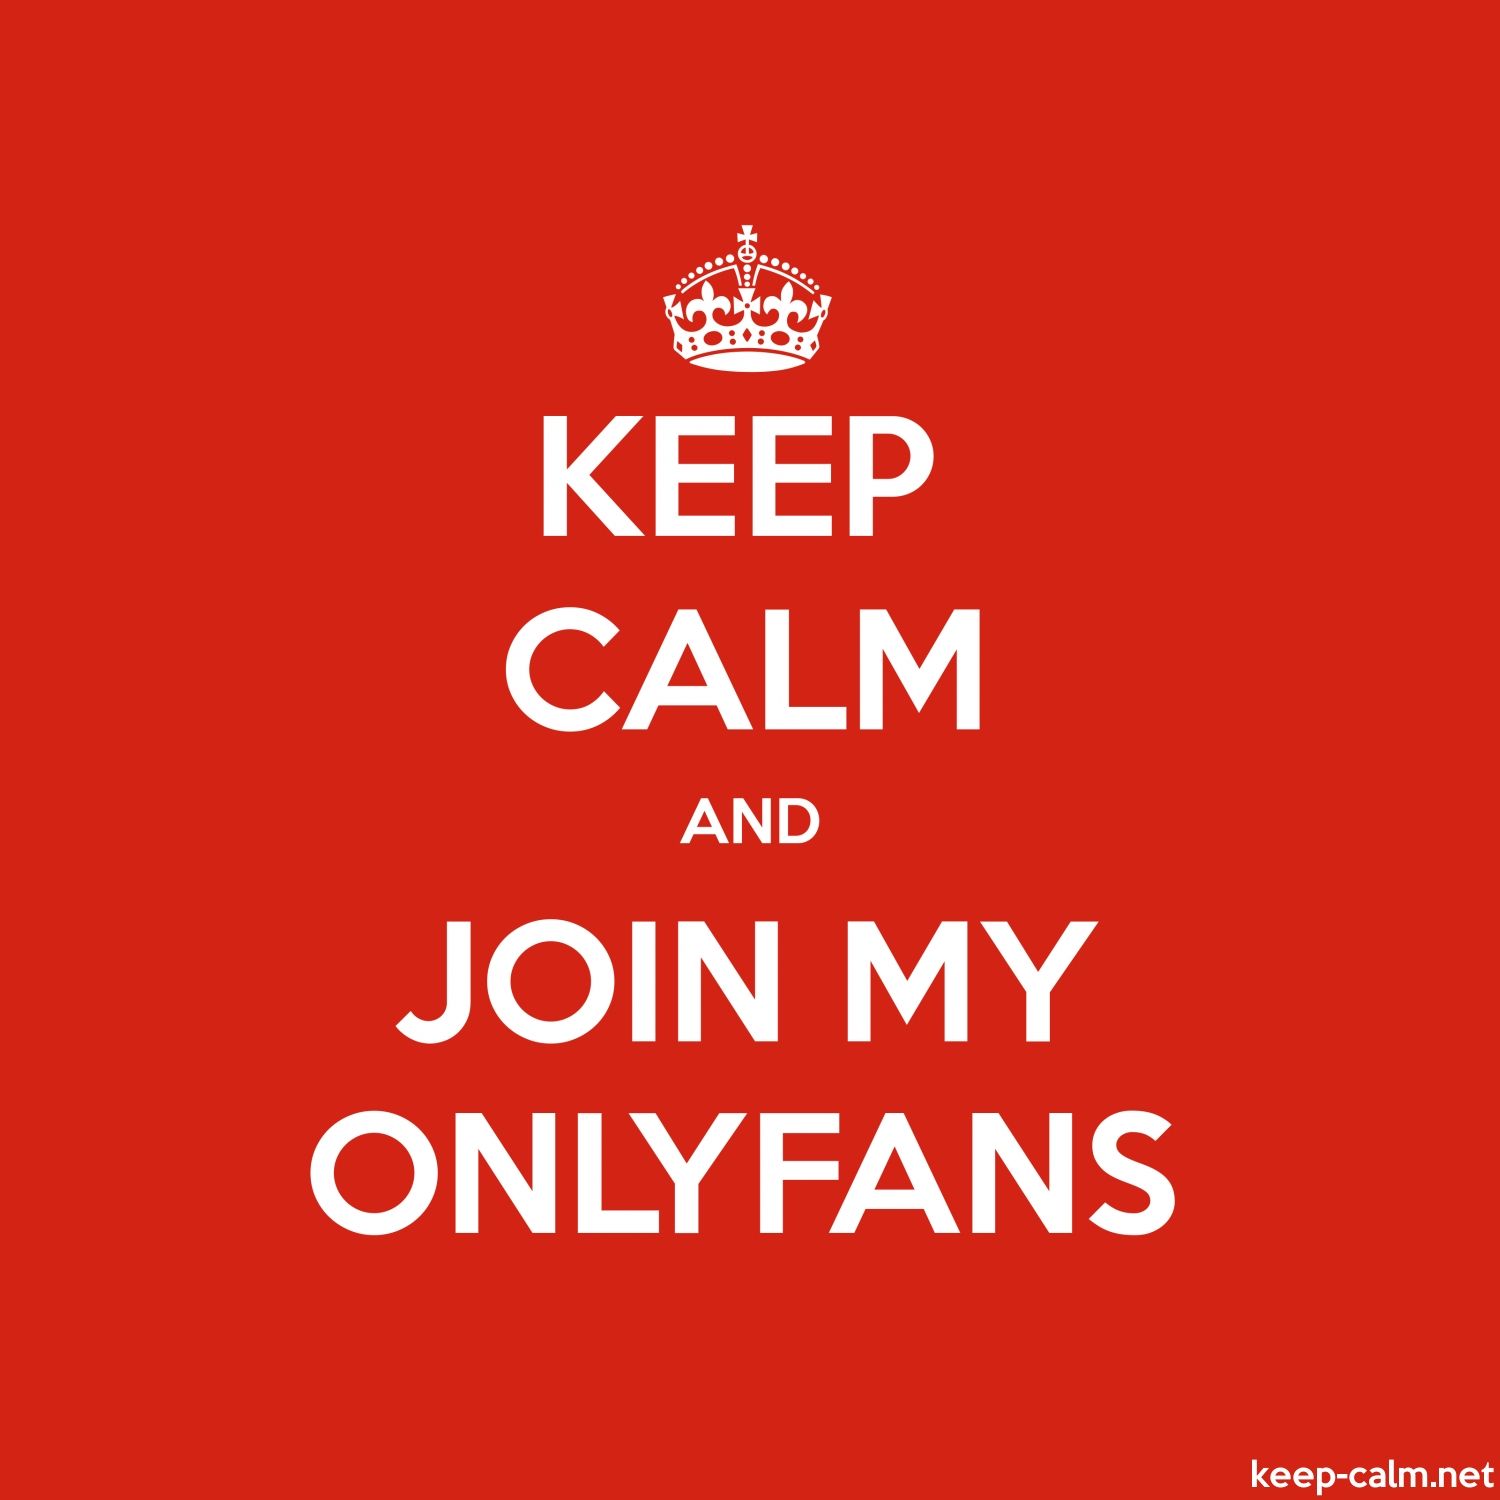 KEEP CALM AND JOIN MY ONLYFANS